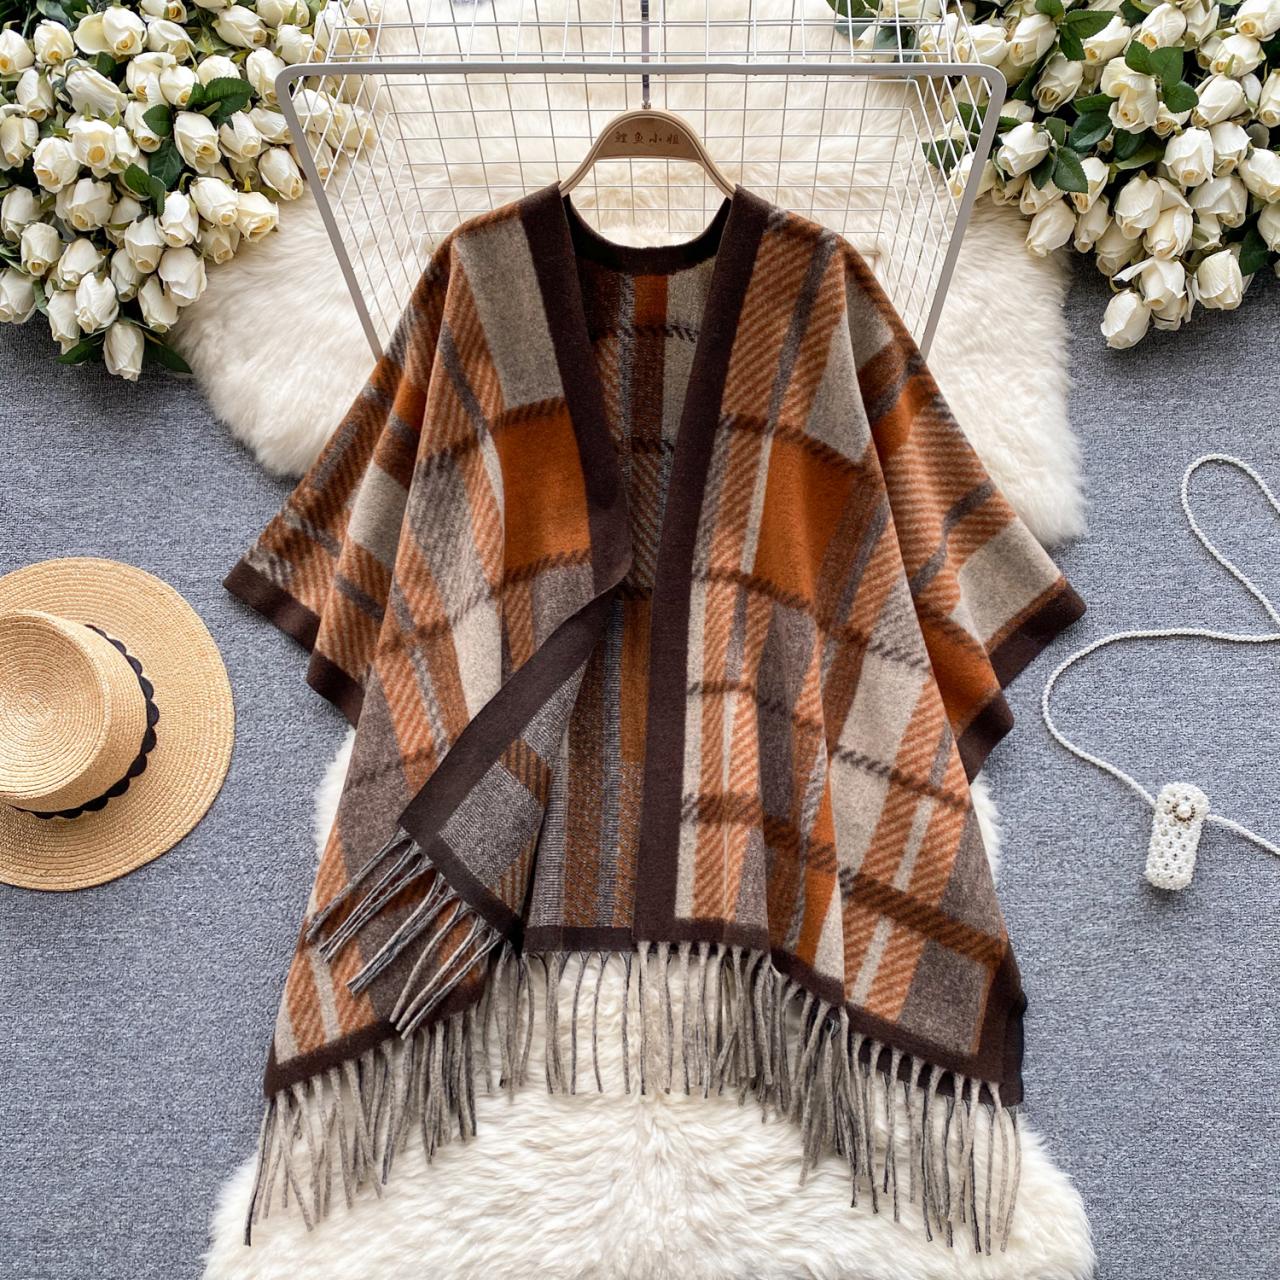 Shawl Wrap Poncho Ruana Cape Cardigan Sweater Open Front For Spring Fall Winter